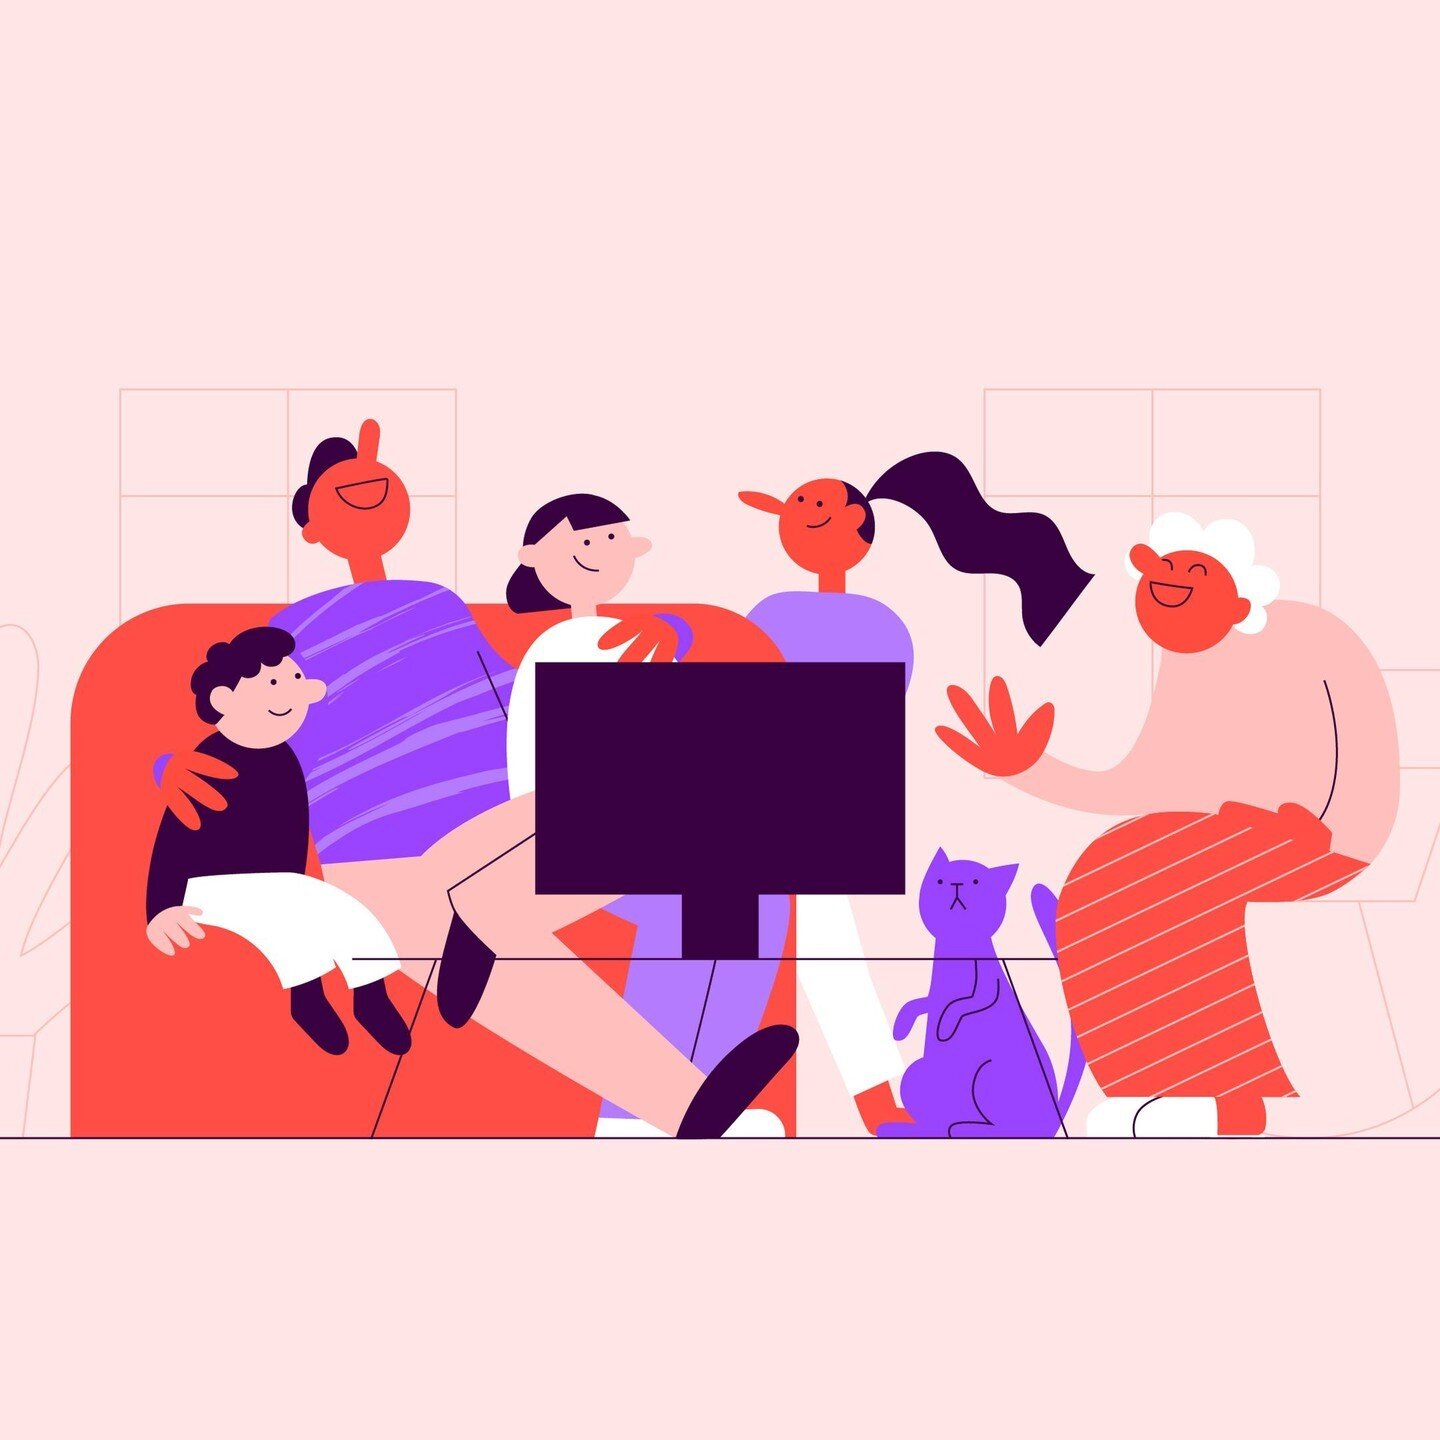 We have just realized that we never shared anything from this past project with you!⁠
⁠
For this client, we created a bunch of cool illustrations and characters, then we put together a visual story for a study they have conducted.⁠
⁠
Unfortunately, w